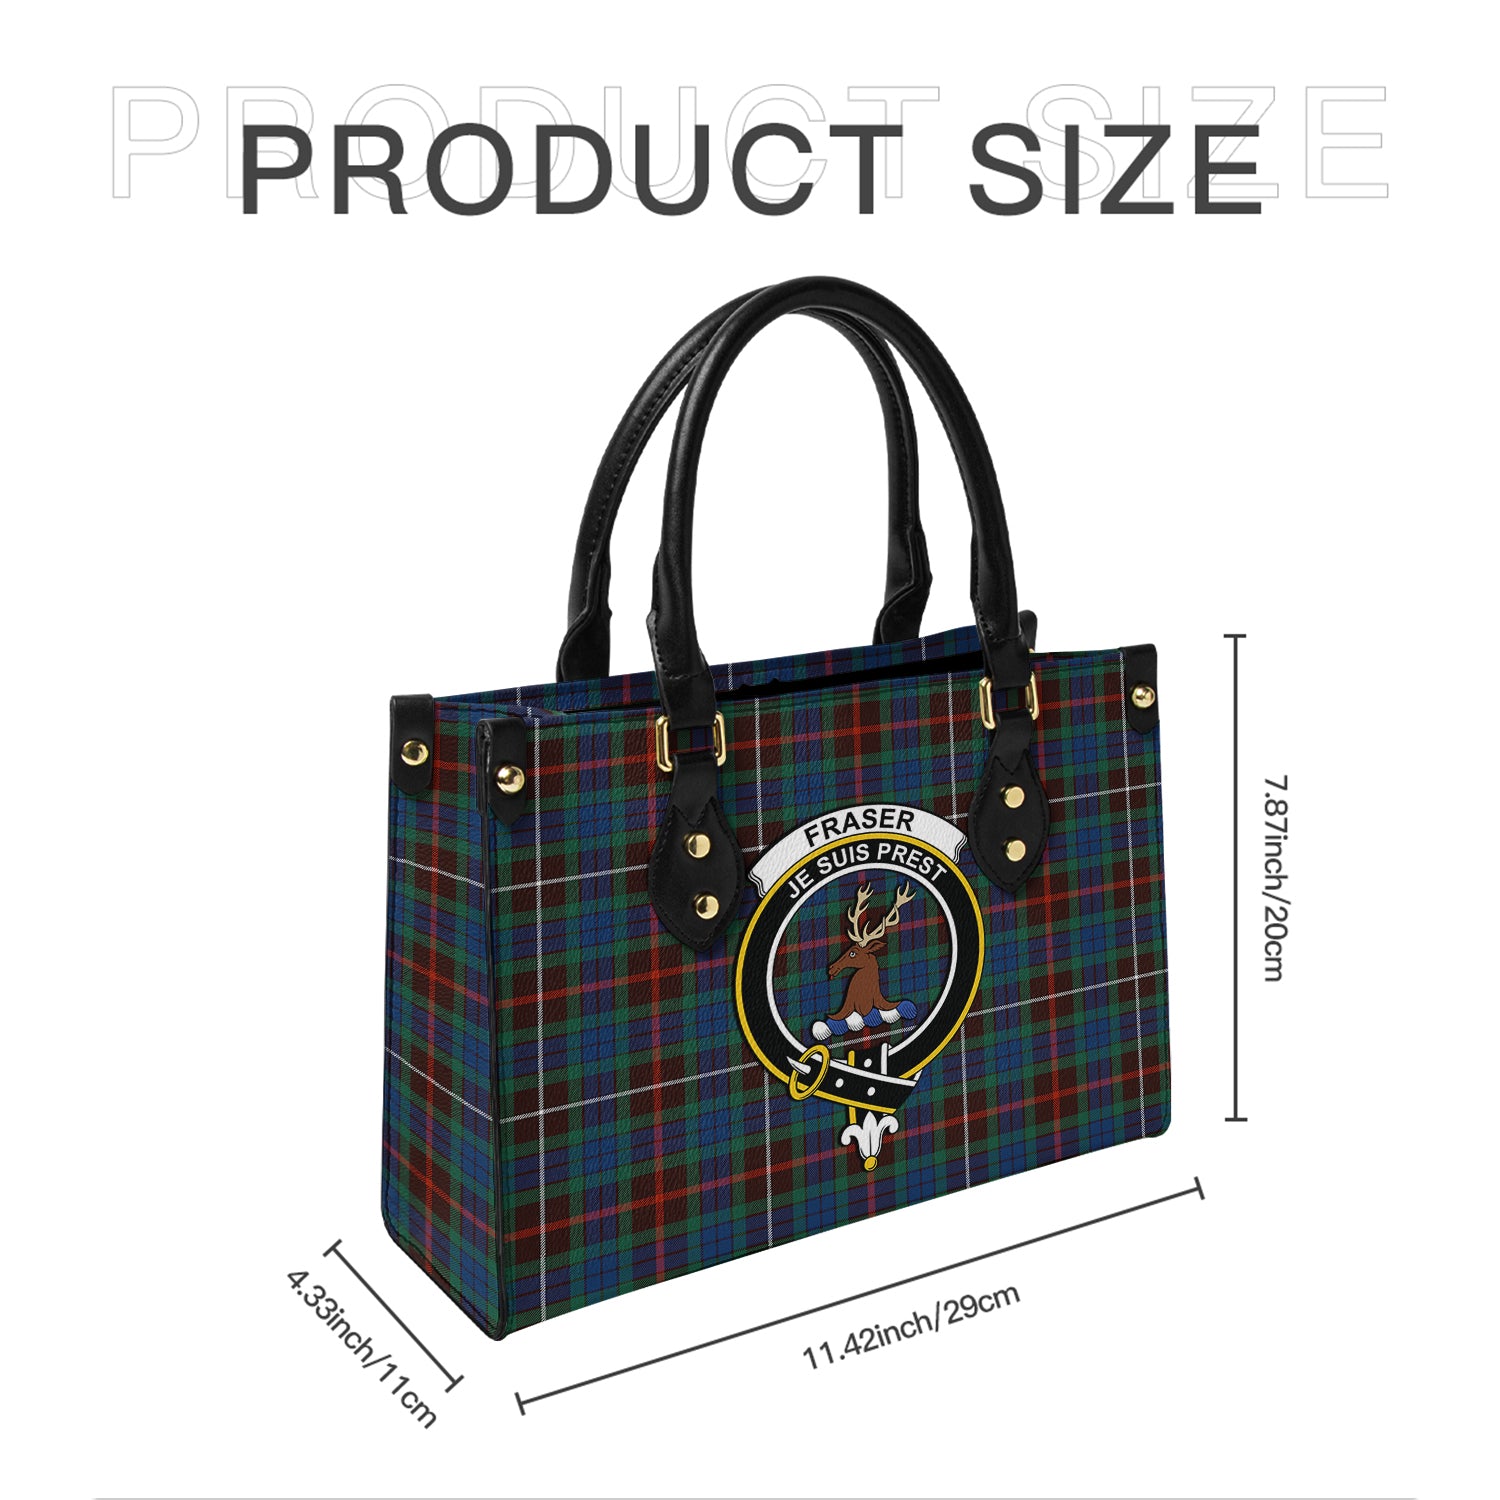 fraser-hunting-ancient-tartan-leather-bag-with-family-crest